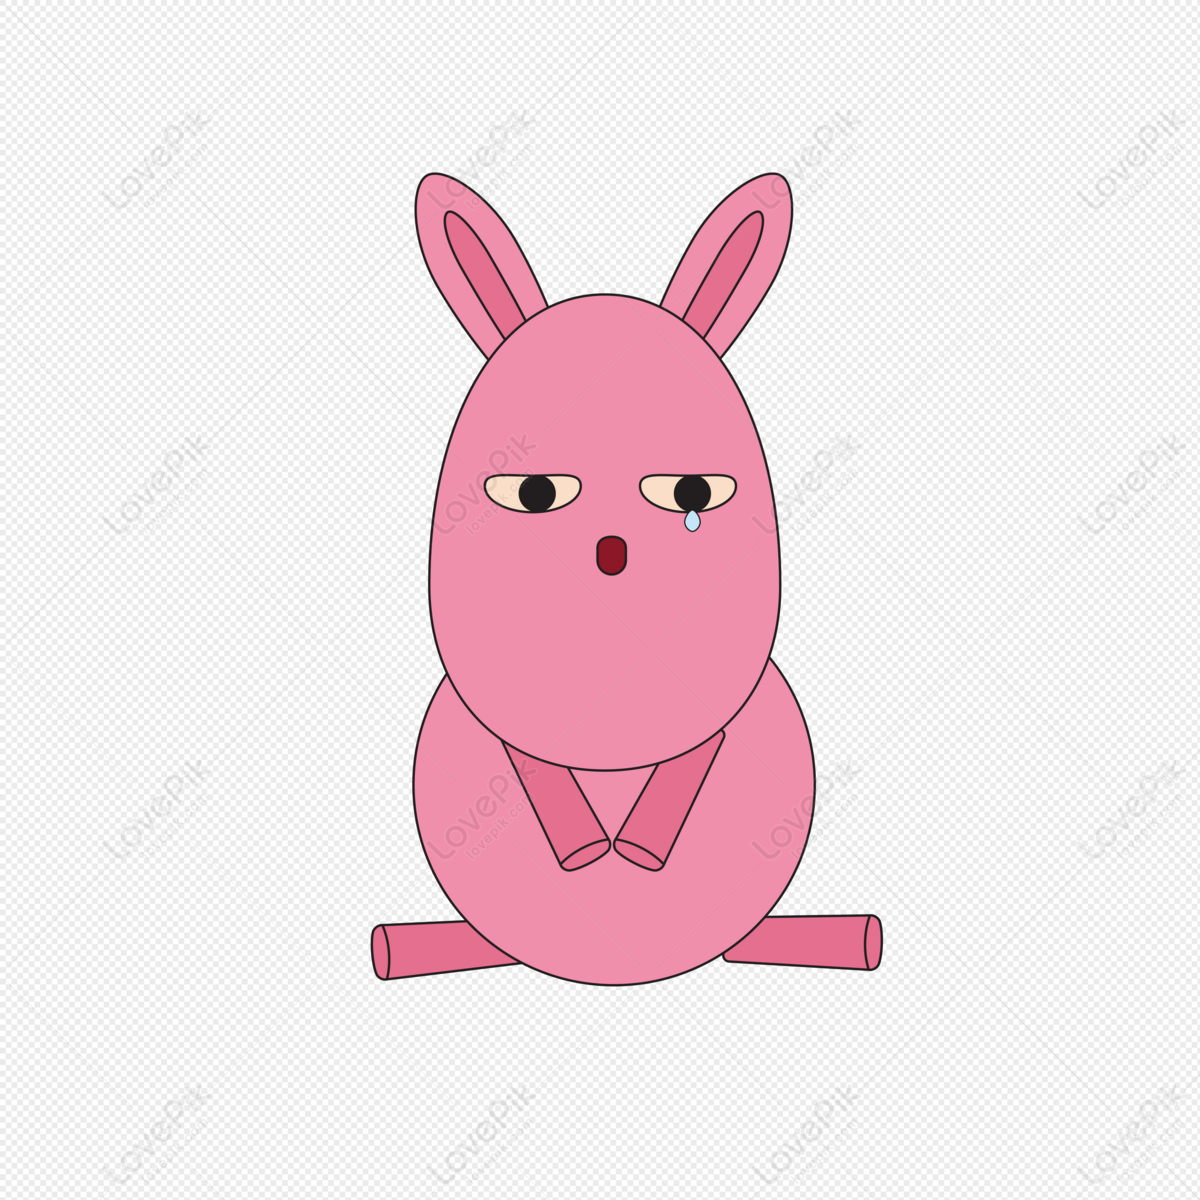 A Dull Pink Rabbit PNG Picture And Clipart Image For Free Download -  Lovepik | 401037975